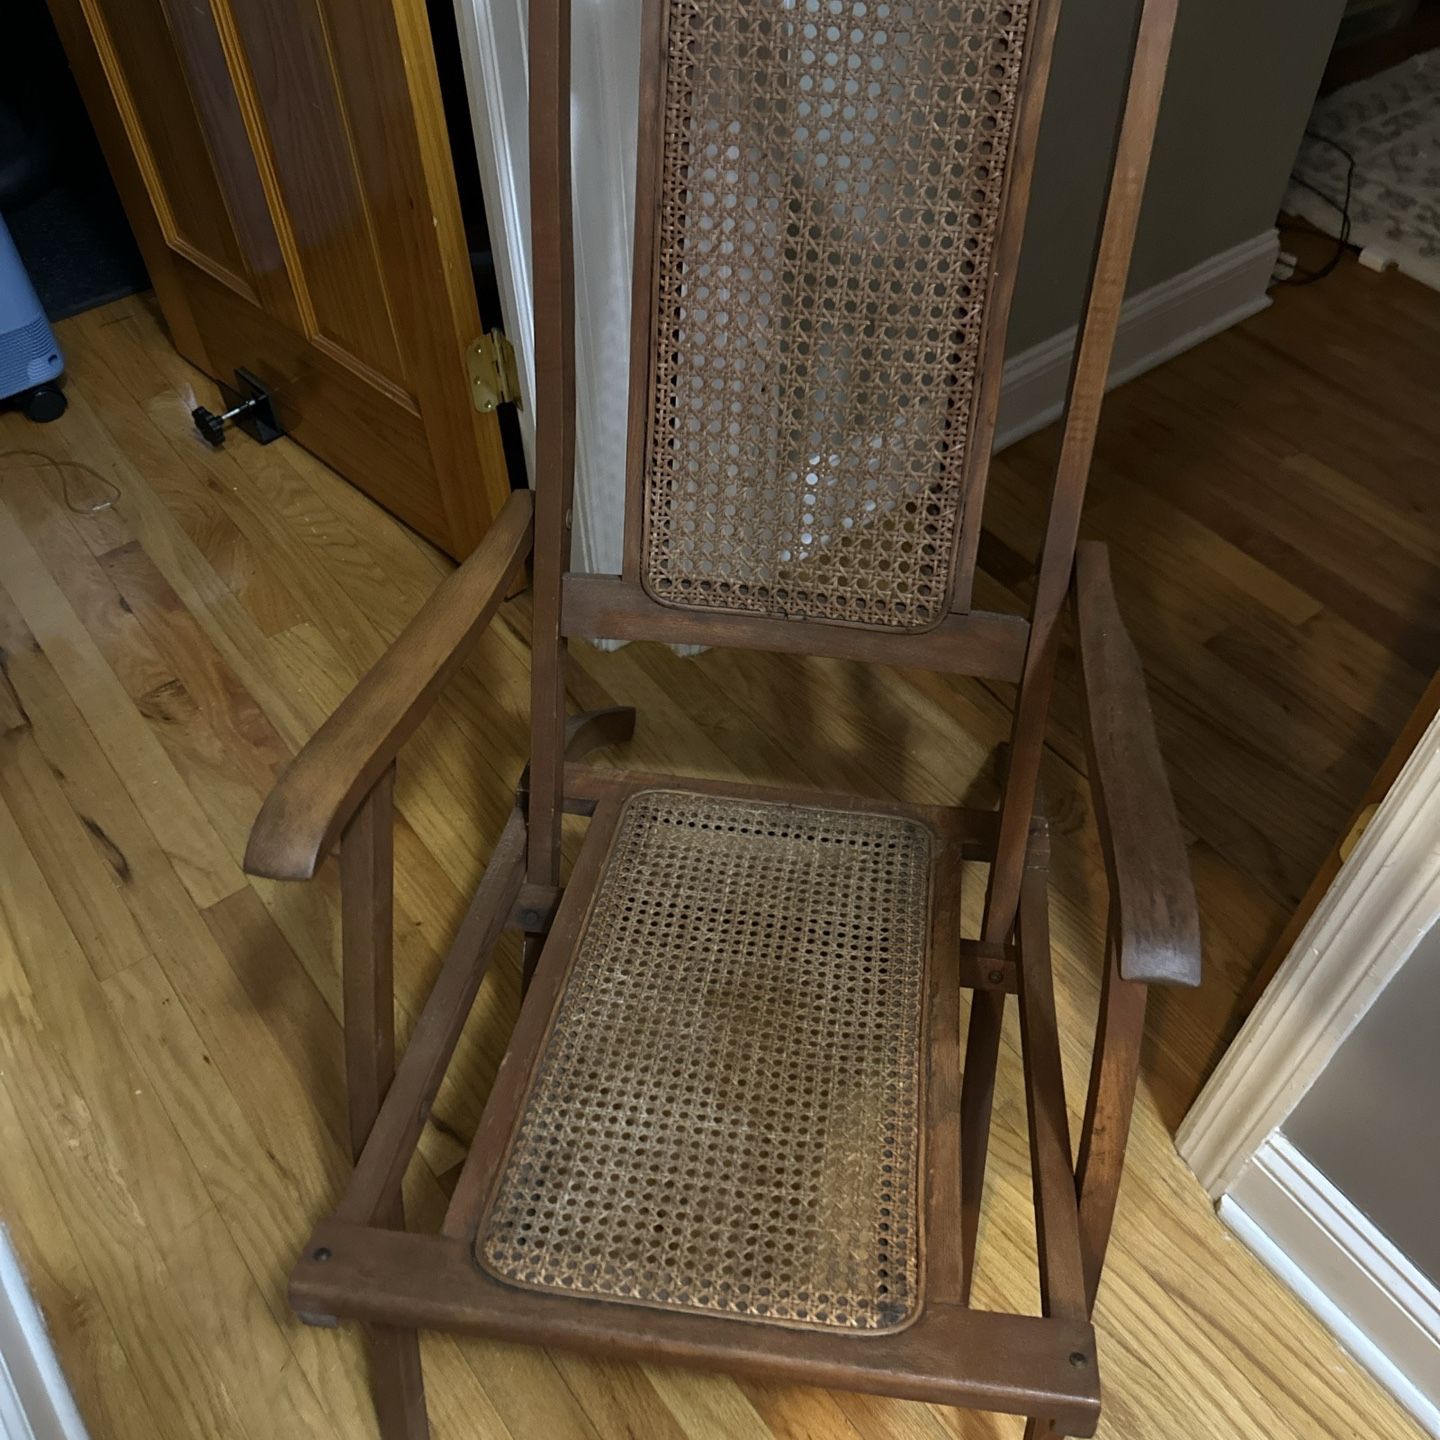 Antique Deck Chair From Old Steamship 100 Plus Years Old!!